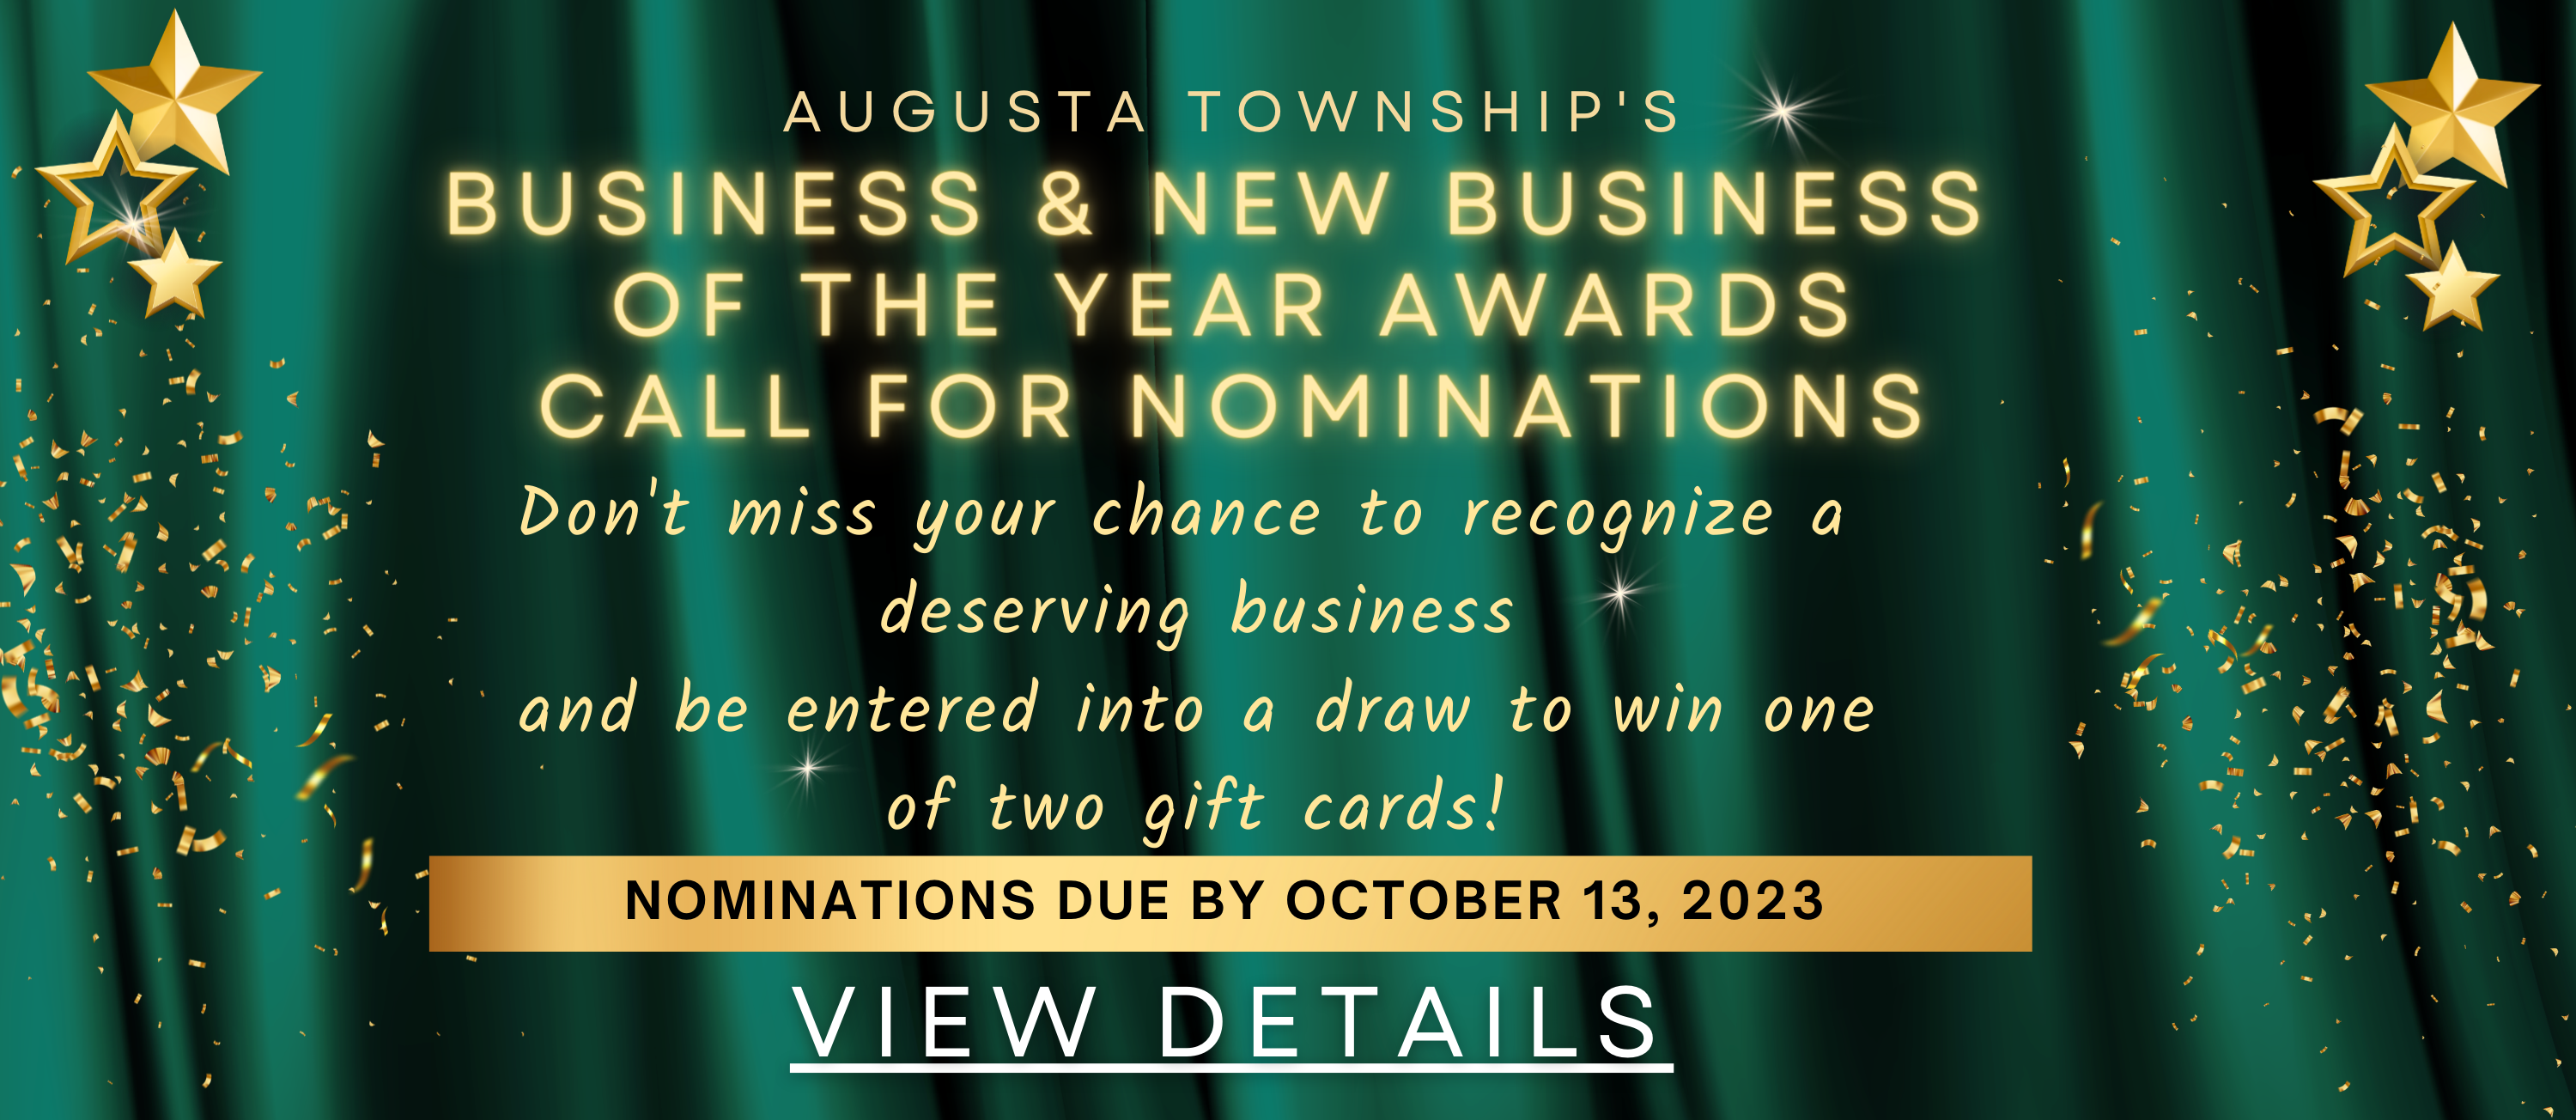 business of the year awards nominations being accepted until october 13